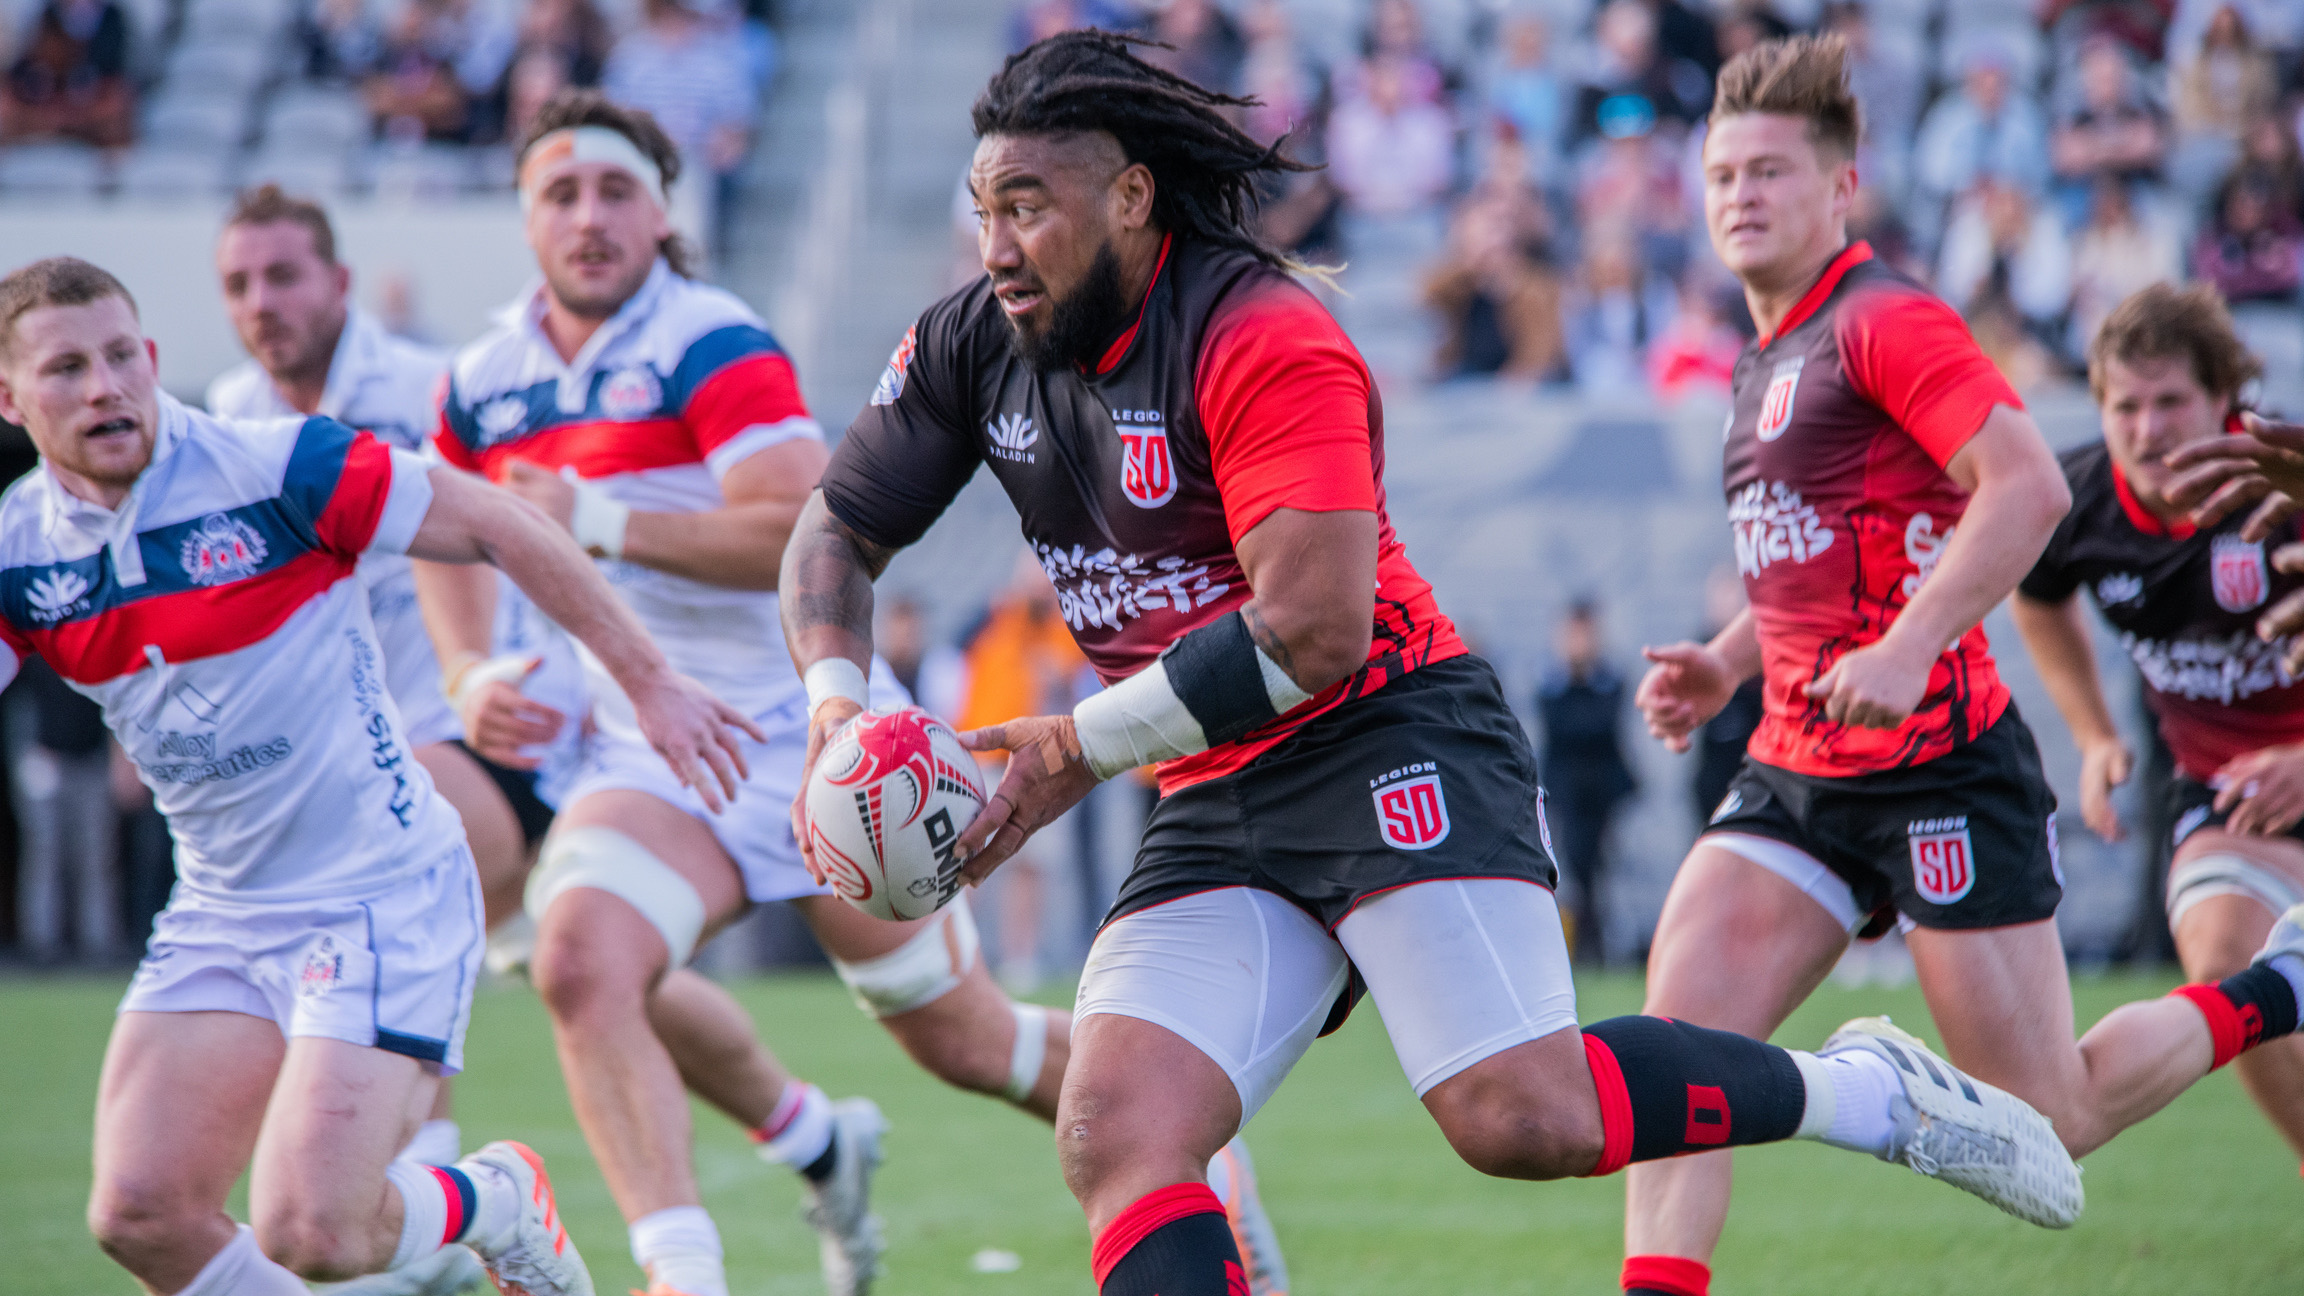 Ma’a Nonu carries the ball in SD Legion’s Feb. 26 match against the New England Free Jacks.